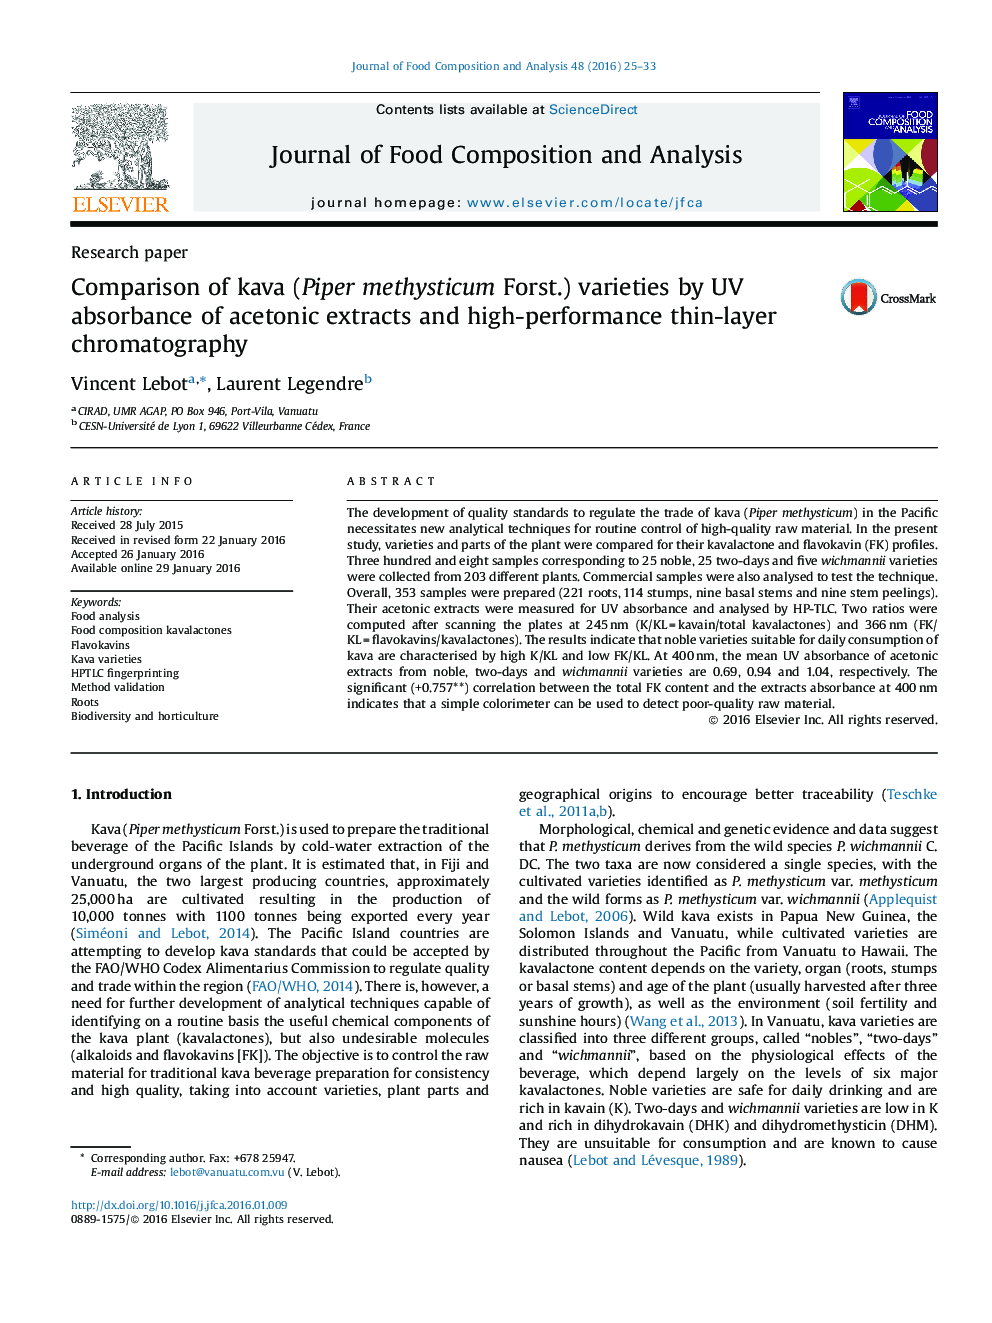 Comparison of kava (Piper methysticum Forst.) varieties by UV absorbance of acetonic extracts and high-performance thin-layer chromatography